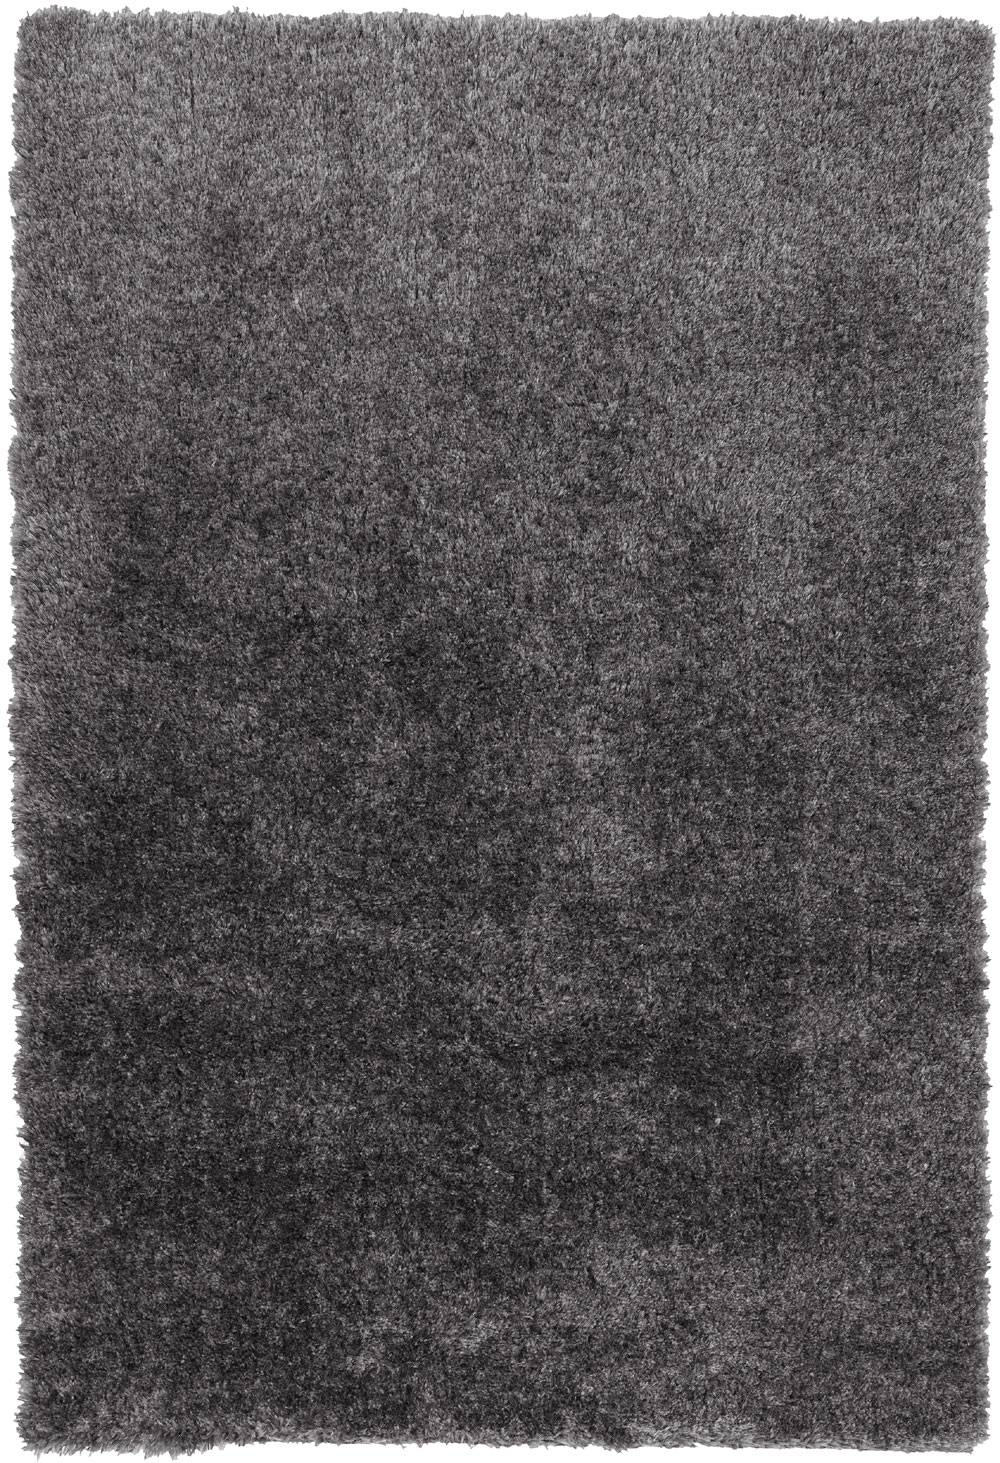 Dalyn Cabot CT1 Taupe Rug